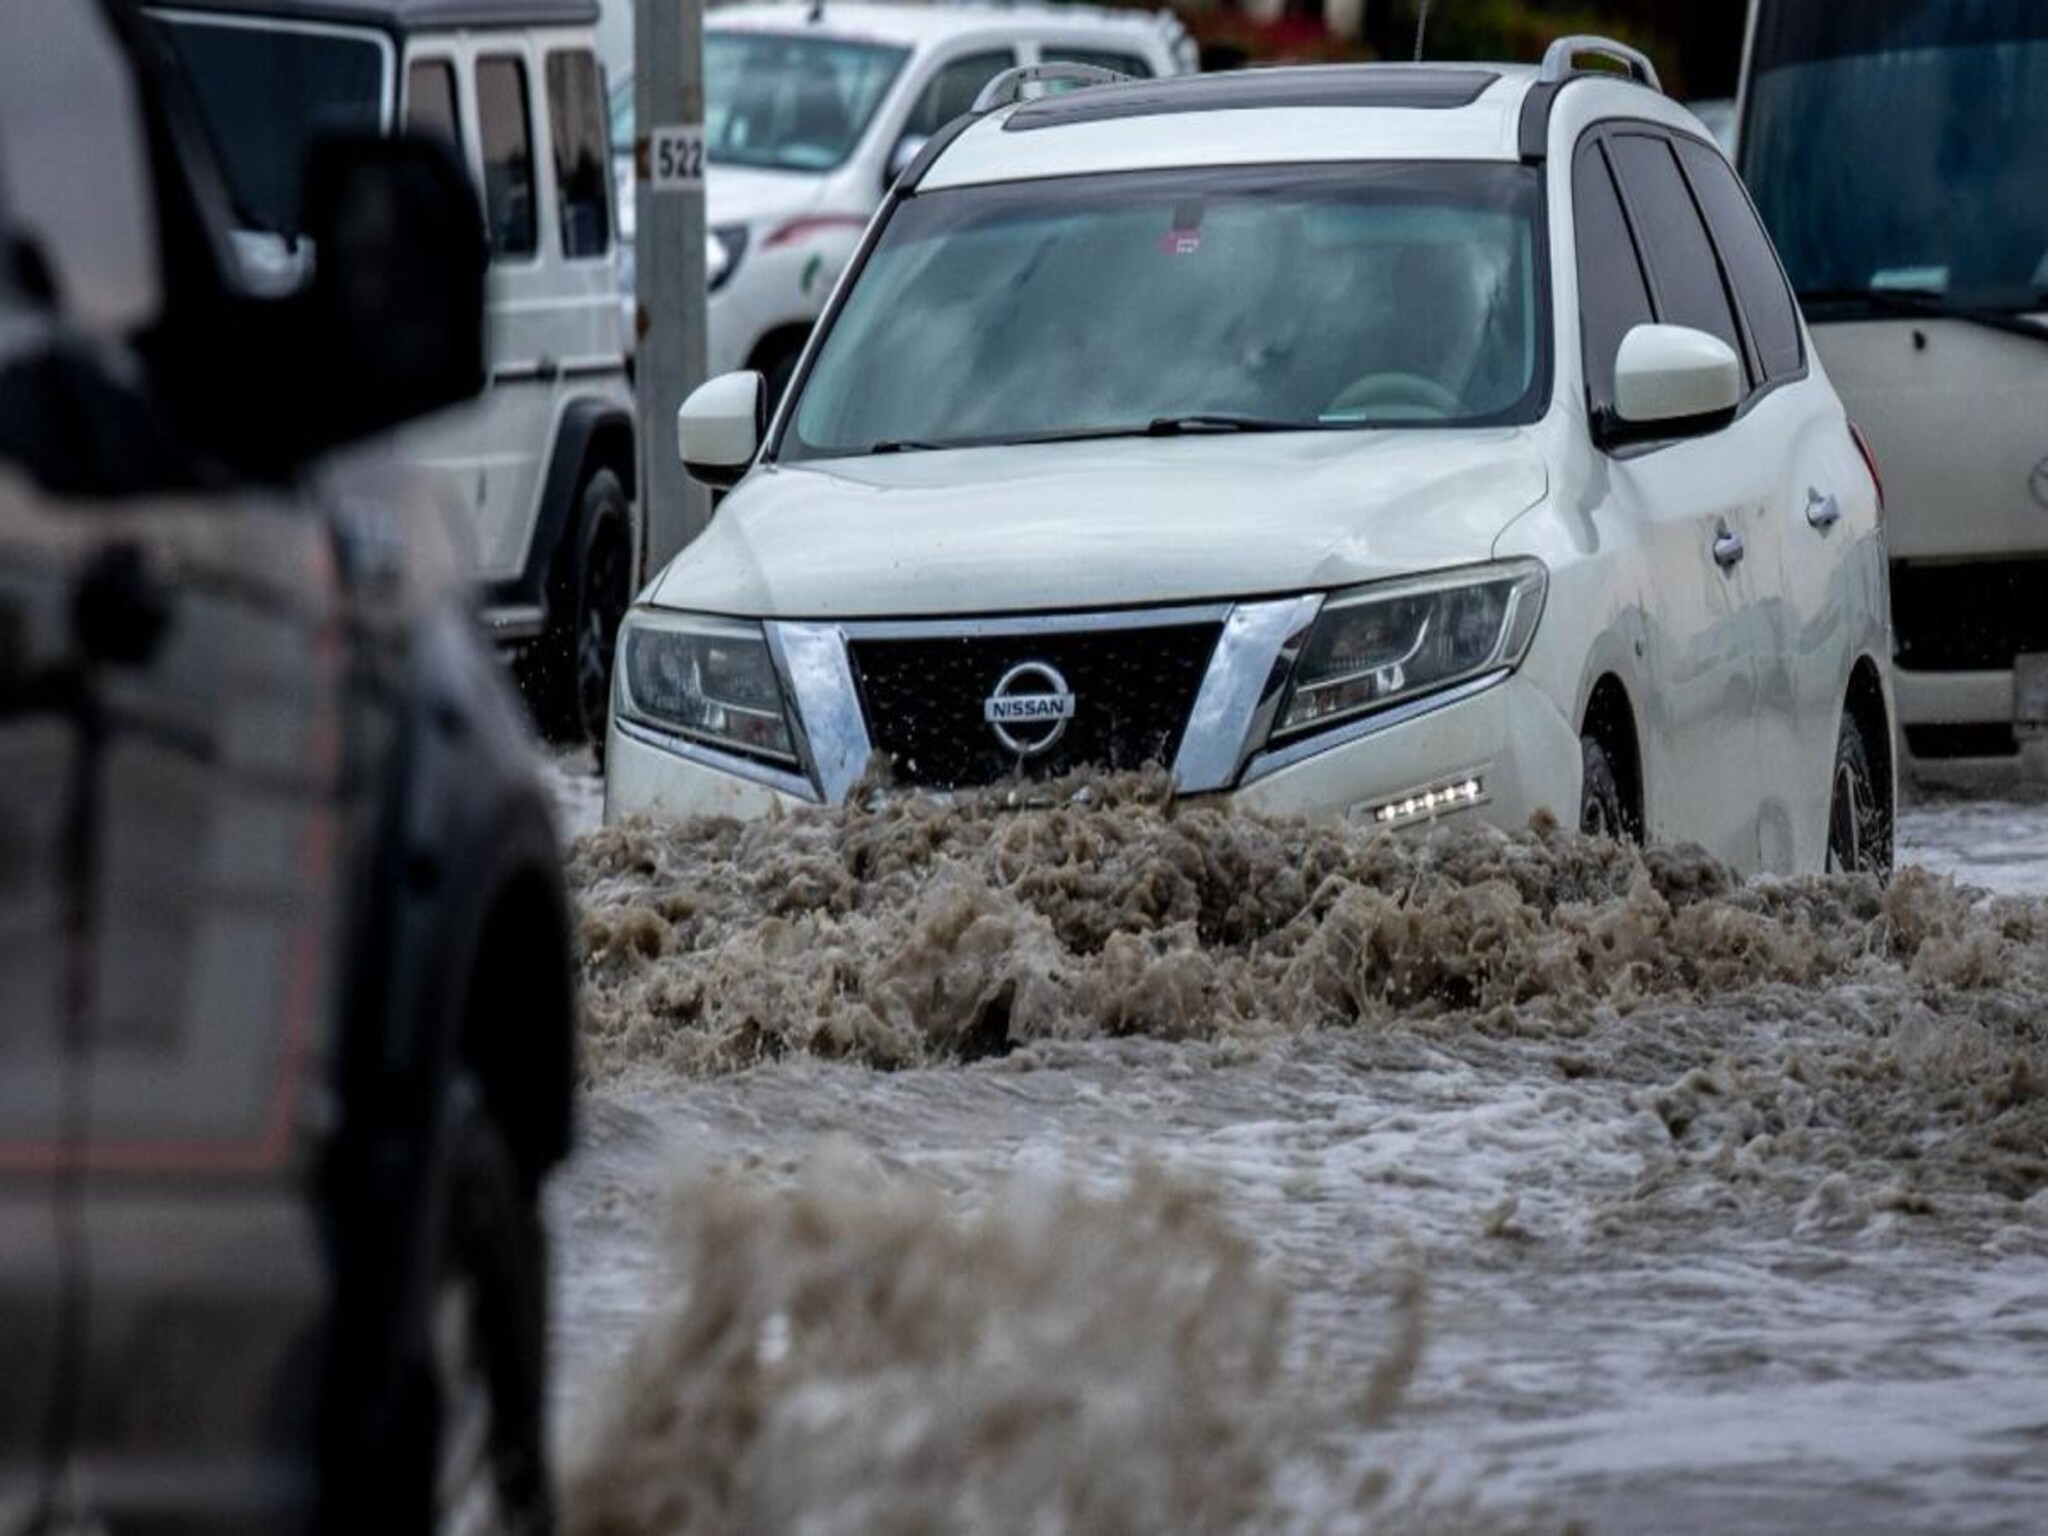 Residents of the UAE are warned of a life-threatening danger due to rainwater collecting on roads